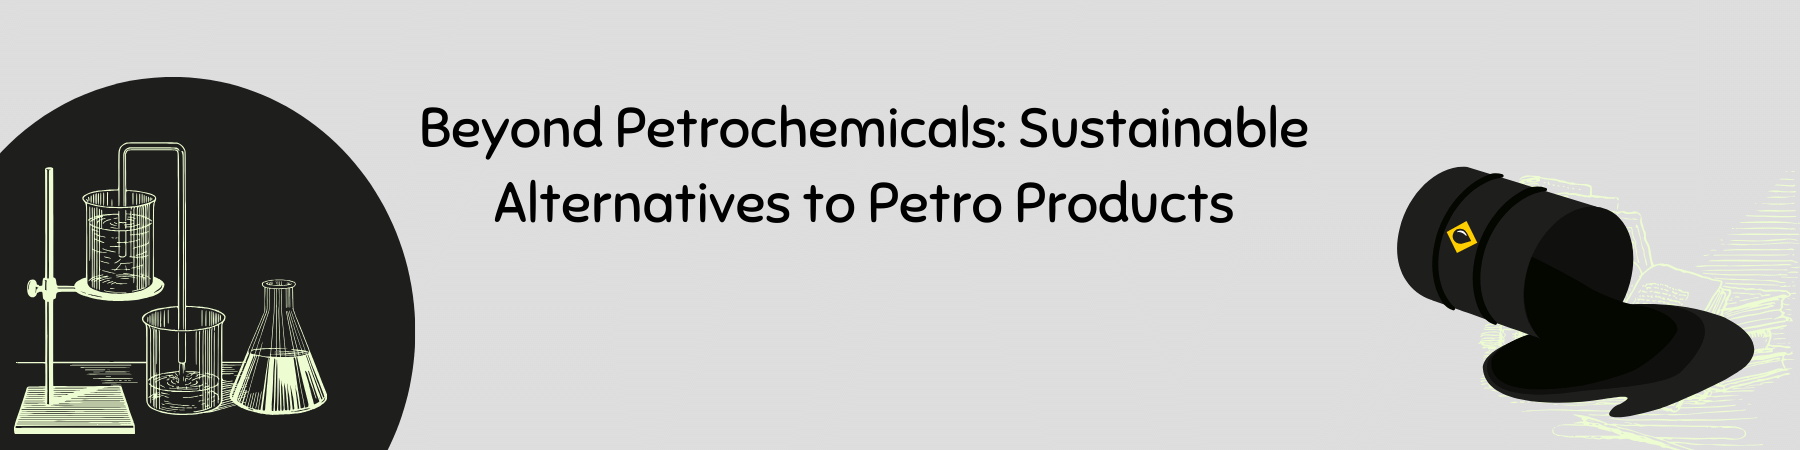 Beyond Petrochemicals_ Sustainable Alternatives to Petro Products